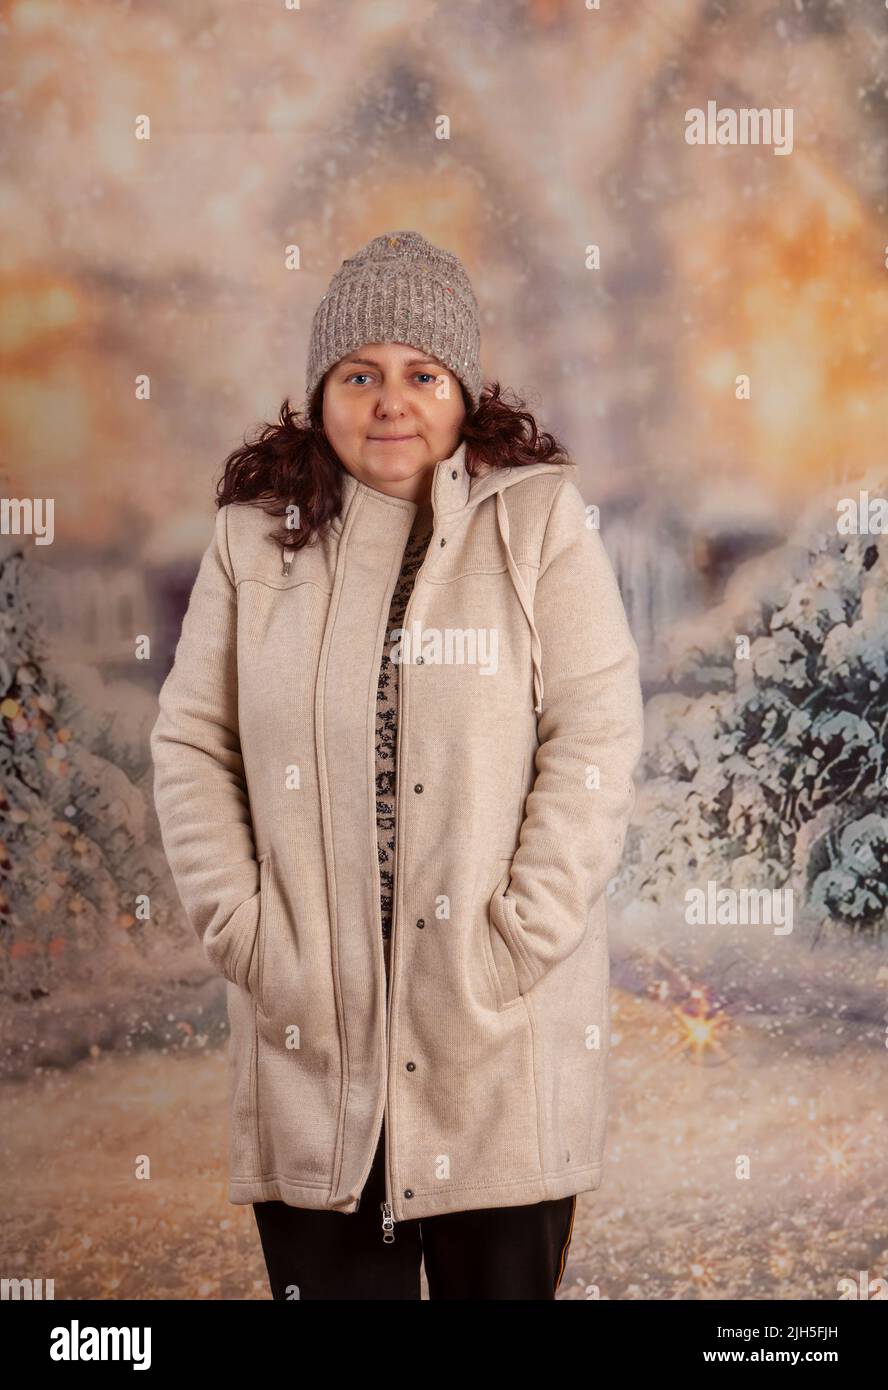 Woman with cap against winter background Stock Photo